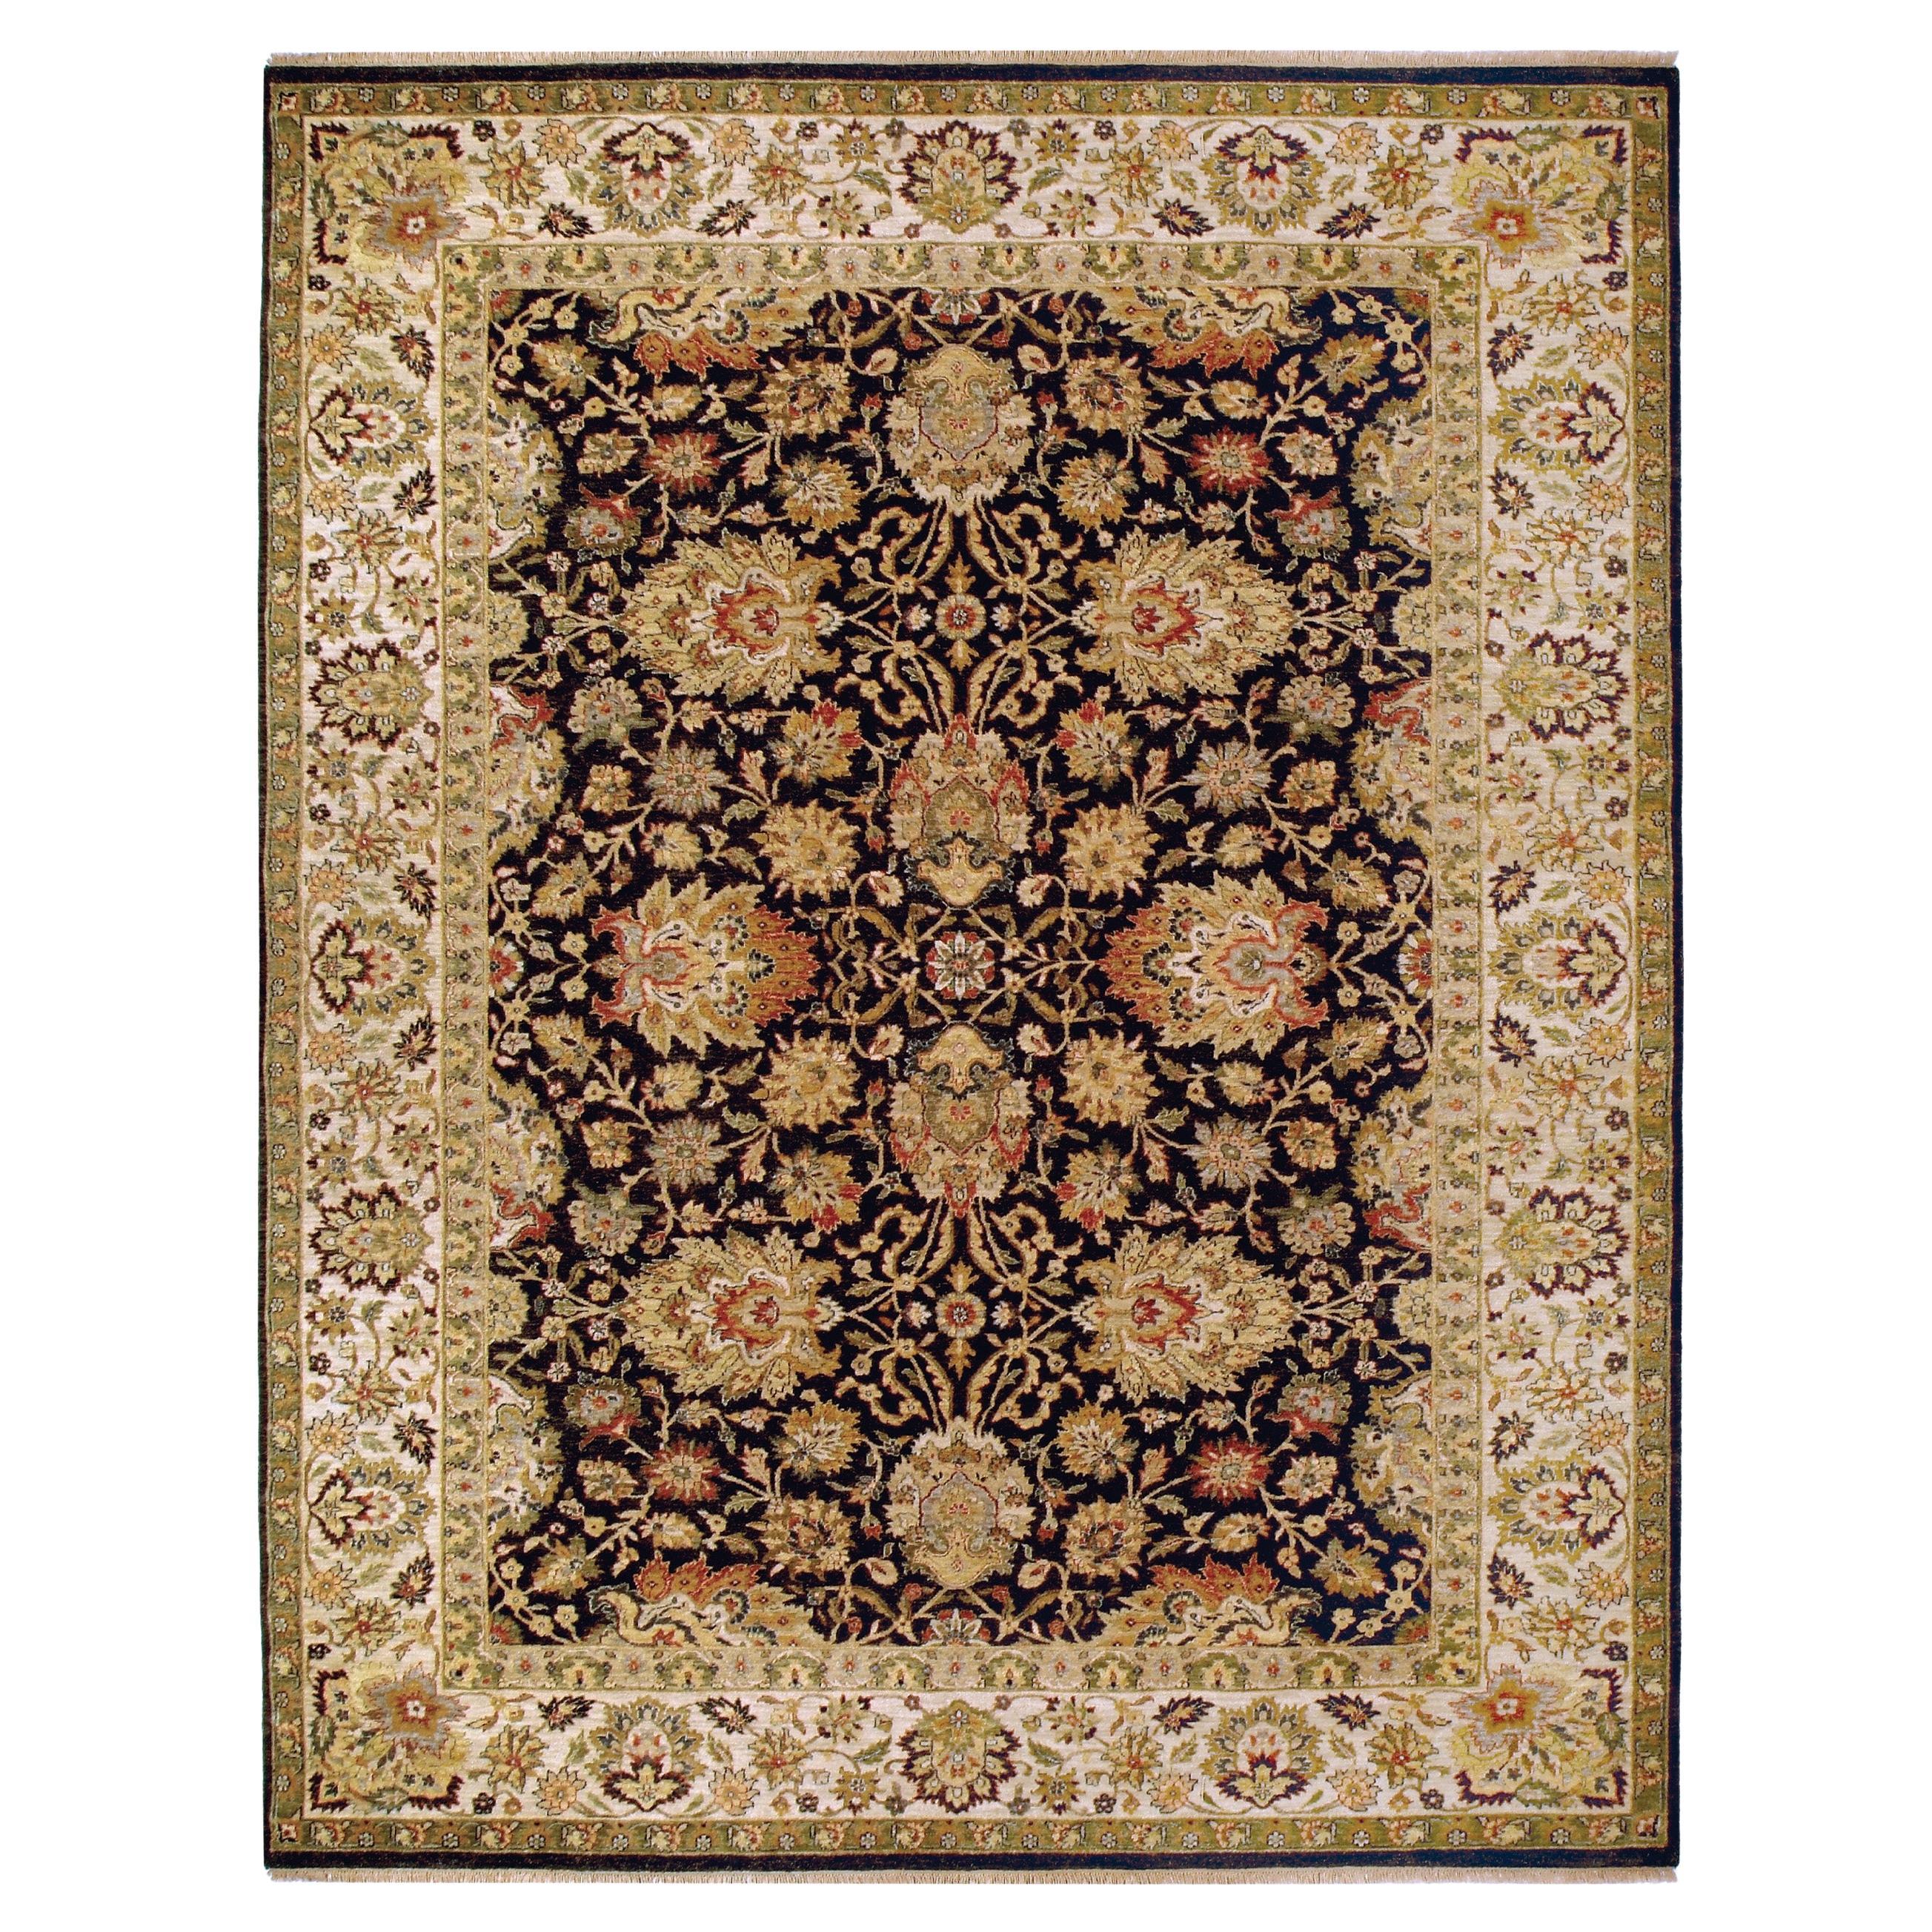 Luxury Traditional Hand-Knotted Distressed Agra Charcoal/Cream 12x Rug